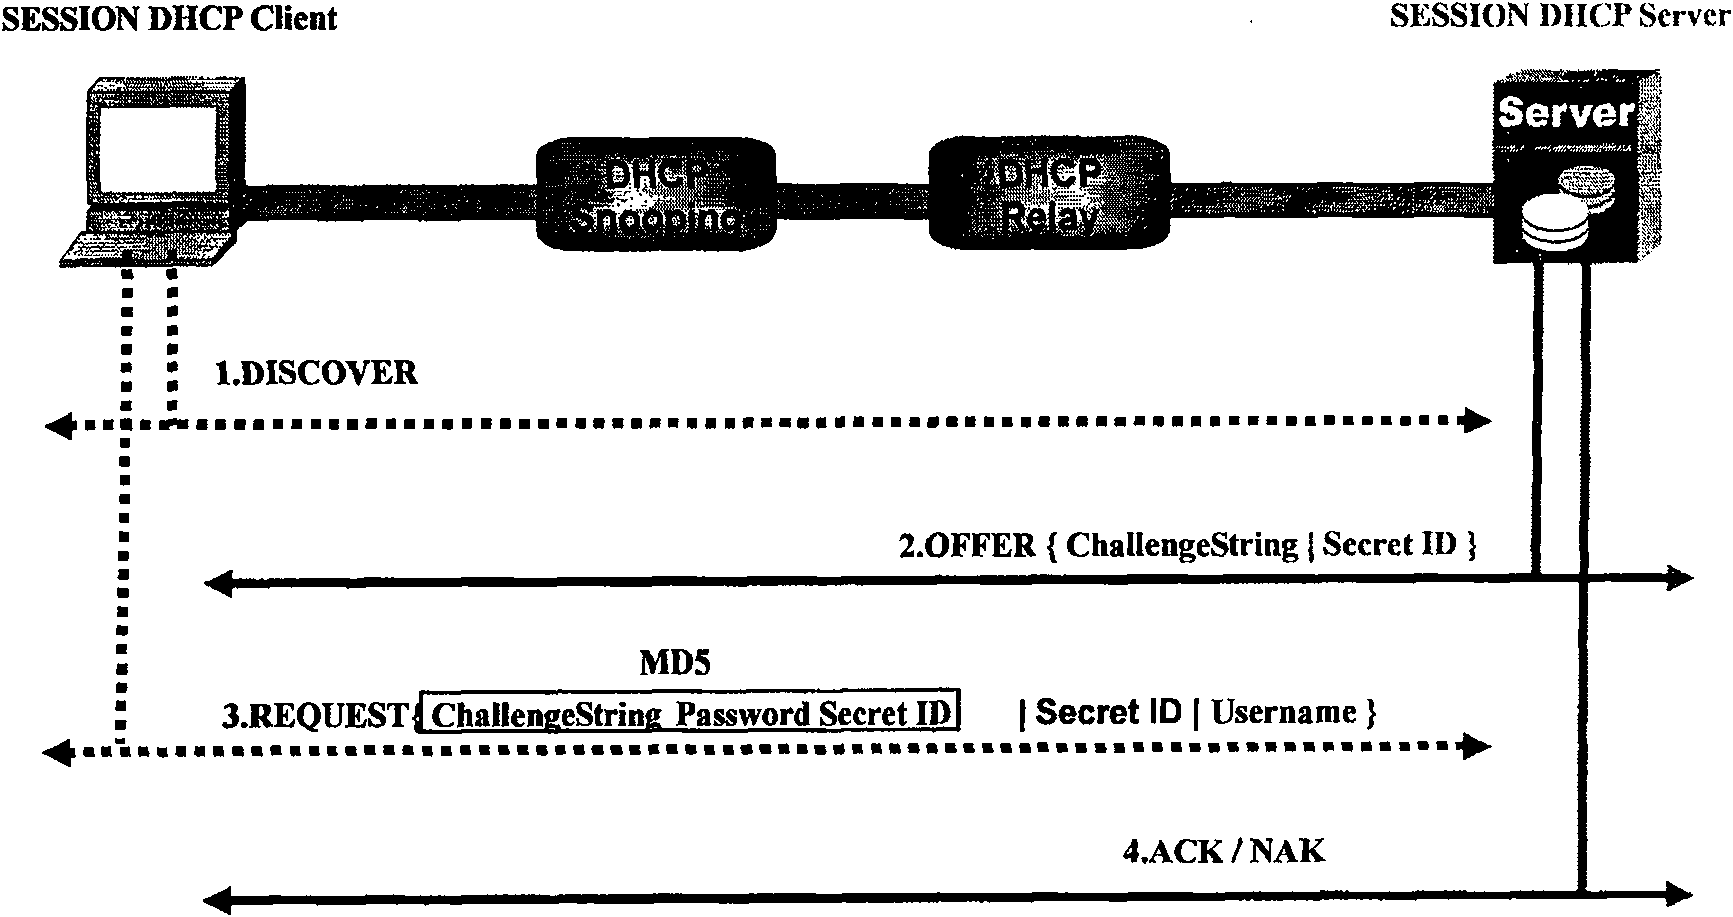 Method for implementing conversation control and duration collection through DHCP extension